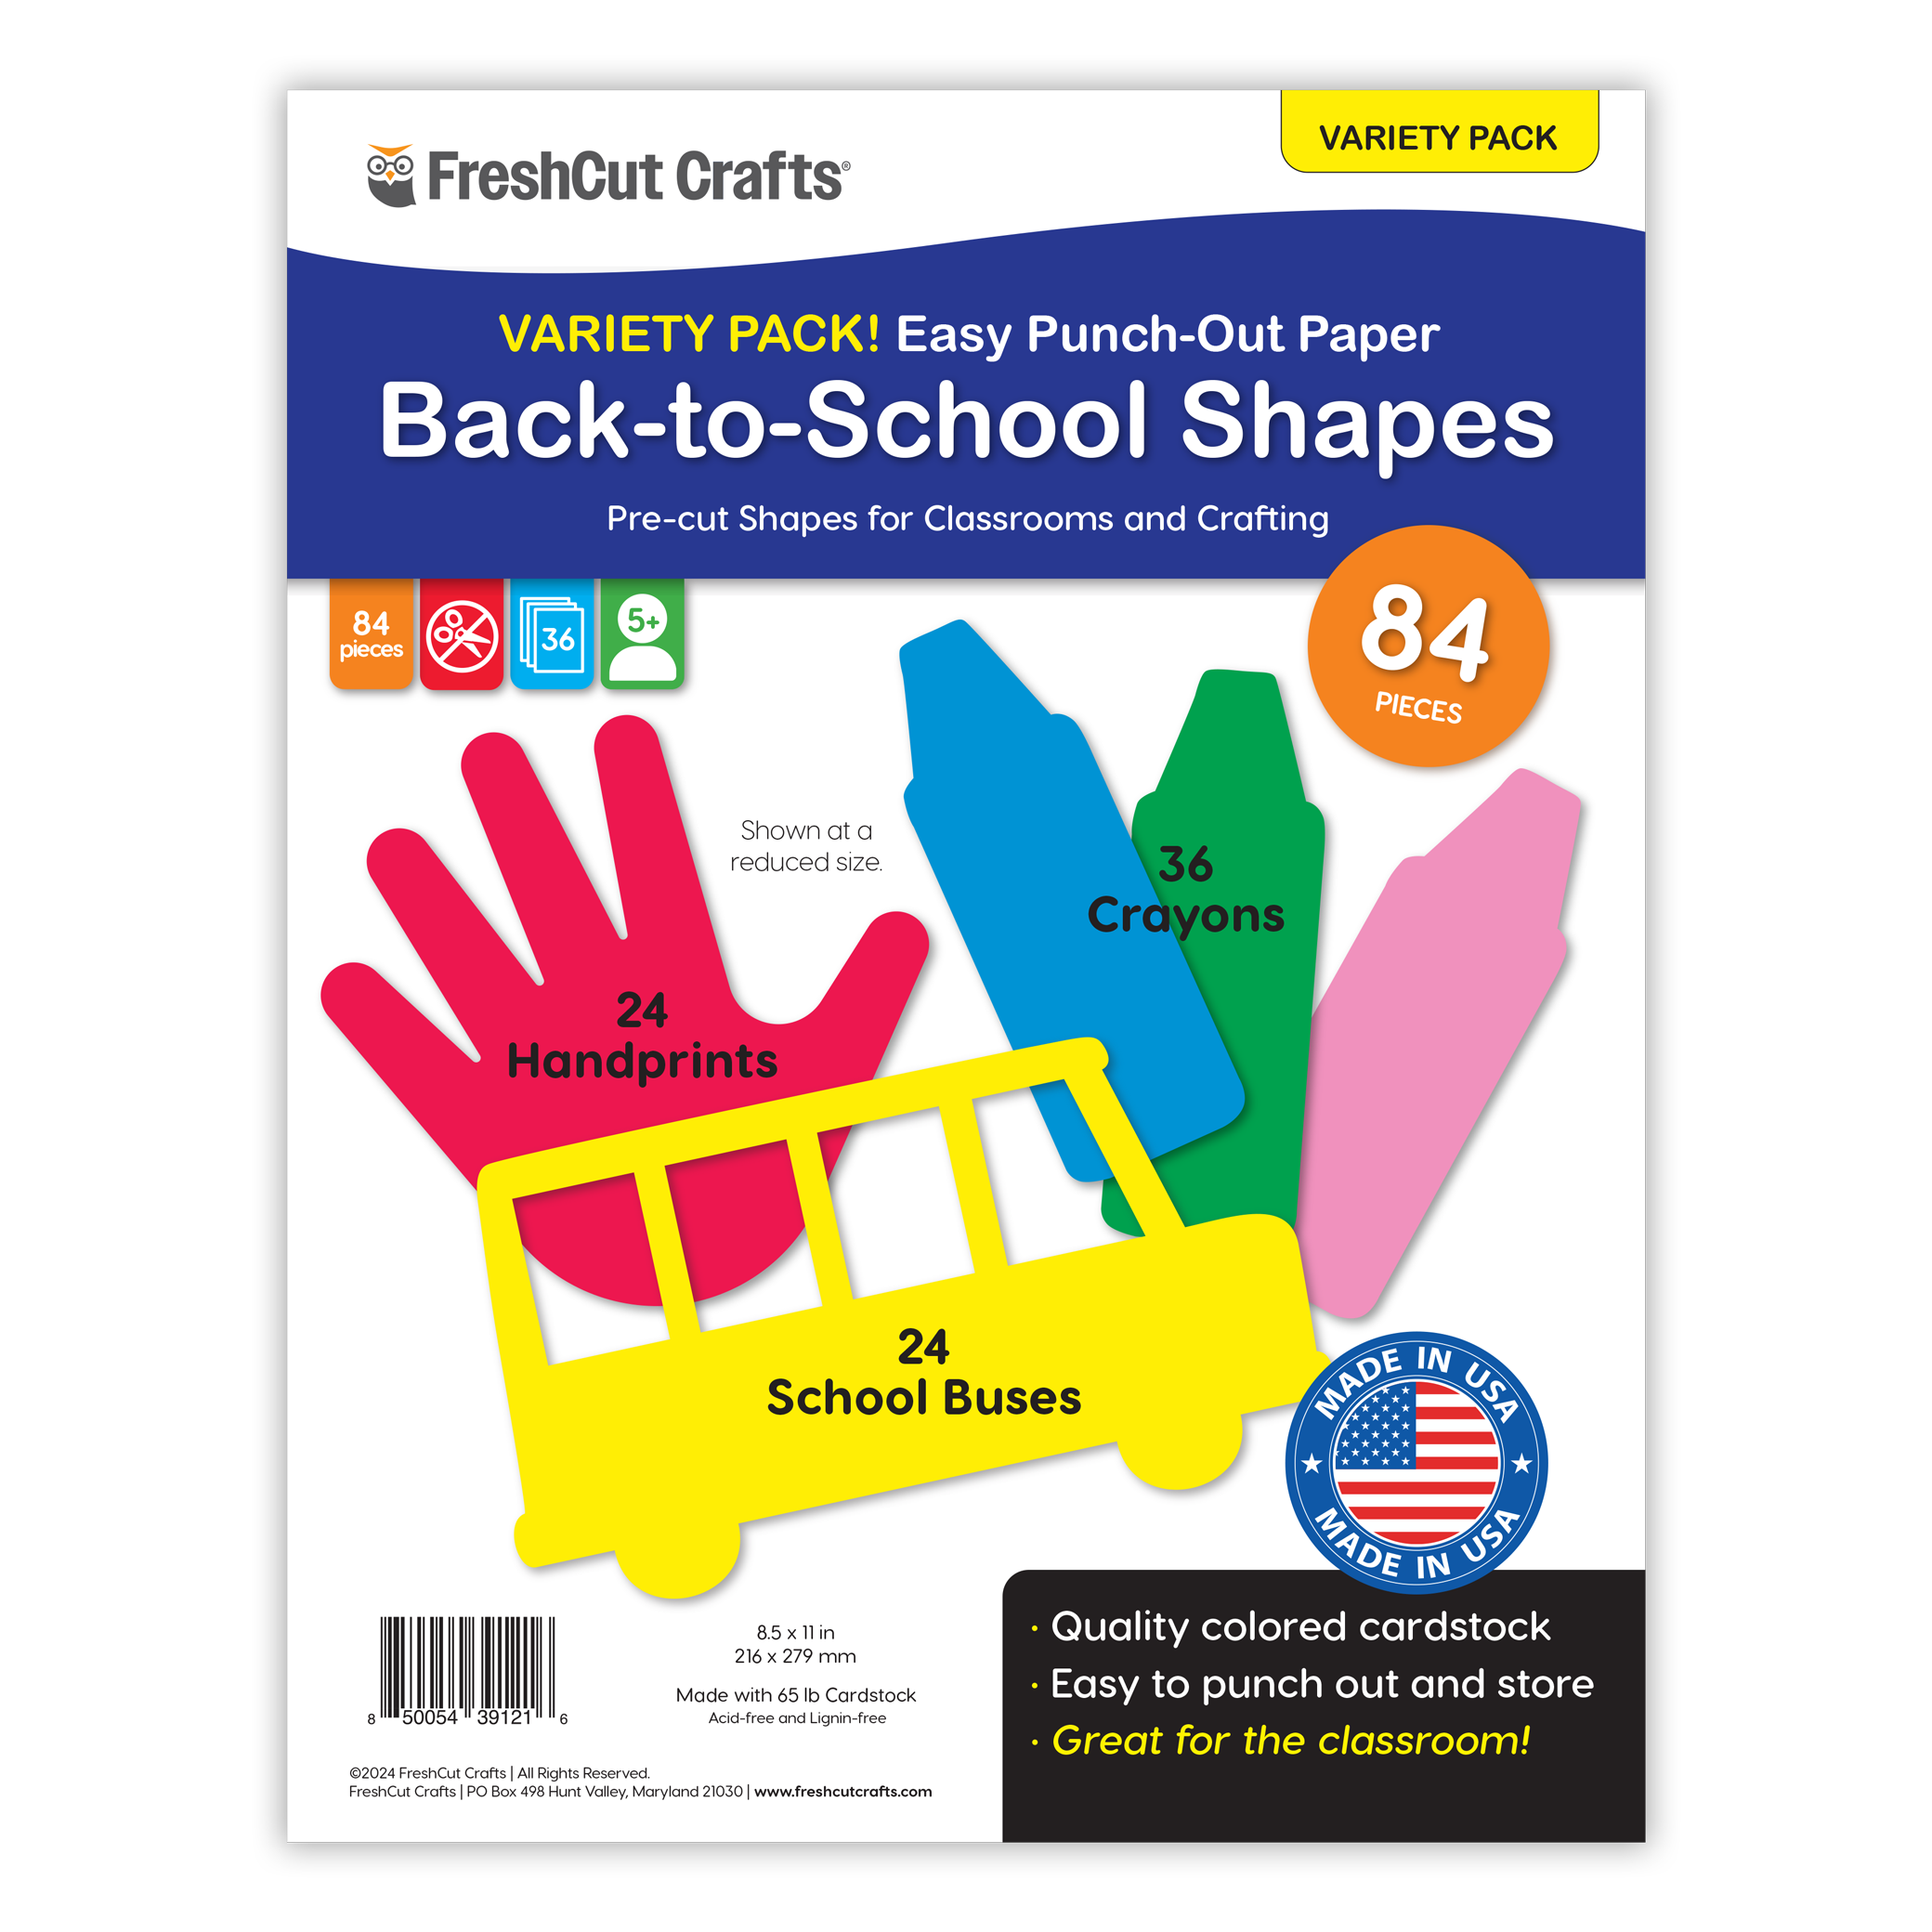 Back-to-School Shapes